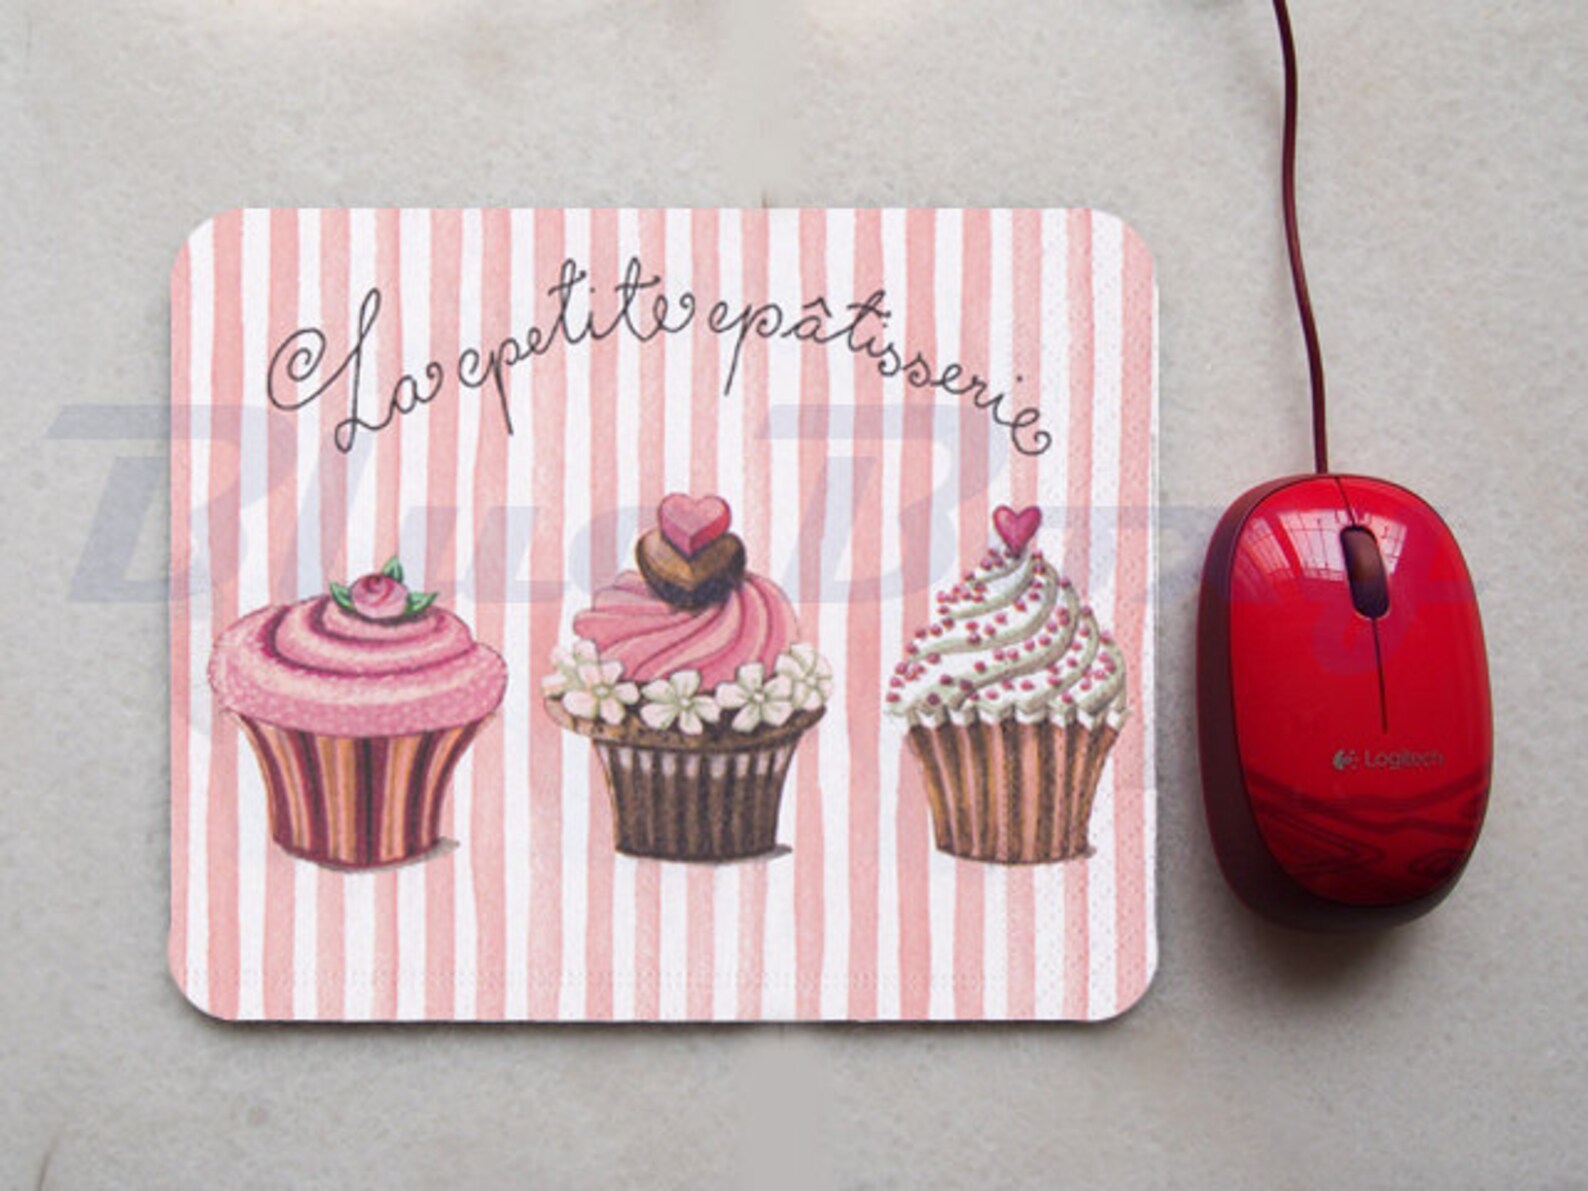 I Love Cupcakes Mouse Pad 9.25